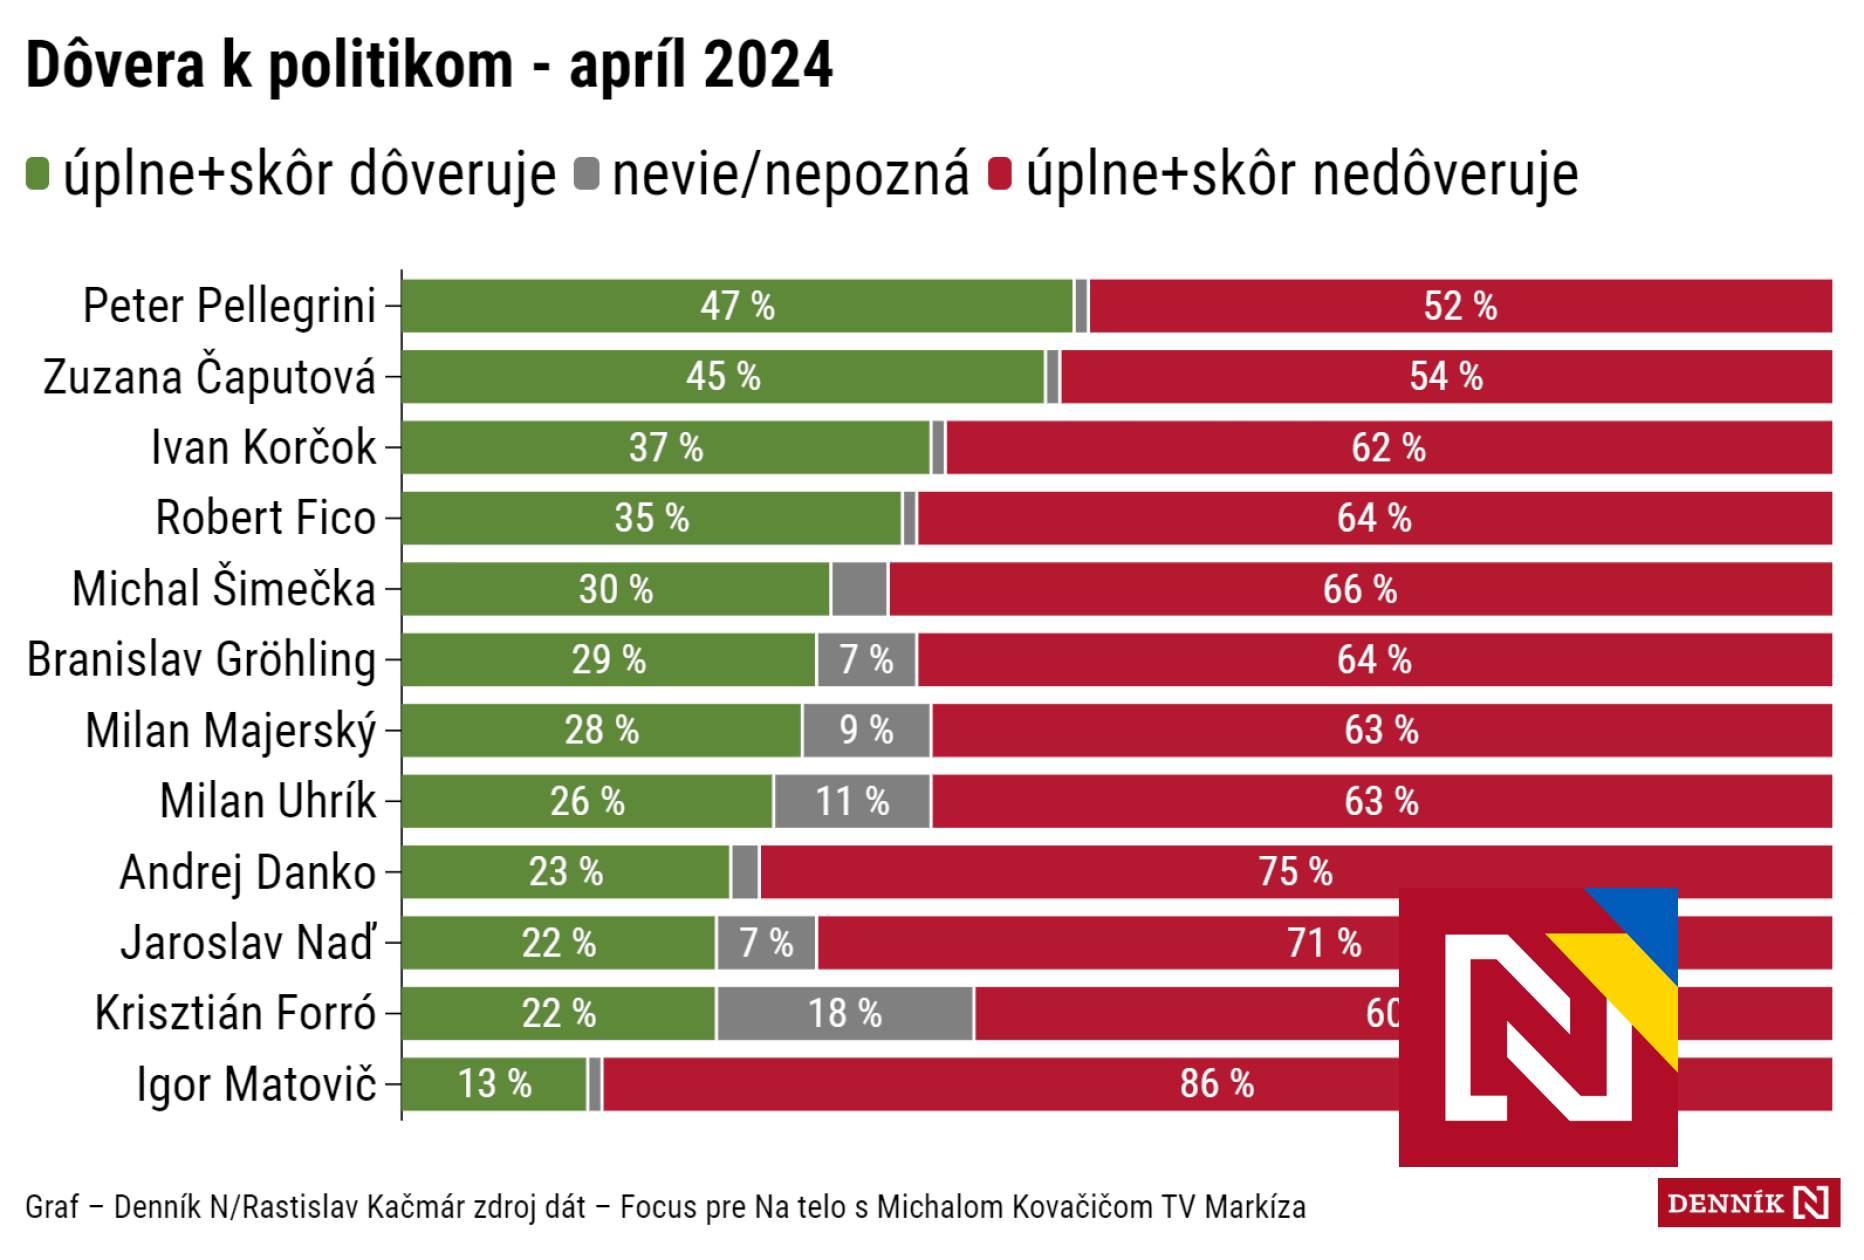 Pellegrini has the most confidence, followed by Čaputová.  Korčok is trusted by almost all PS and SaS voters